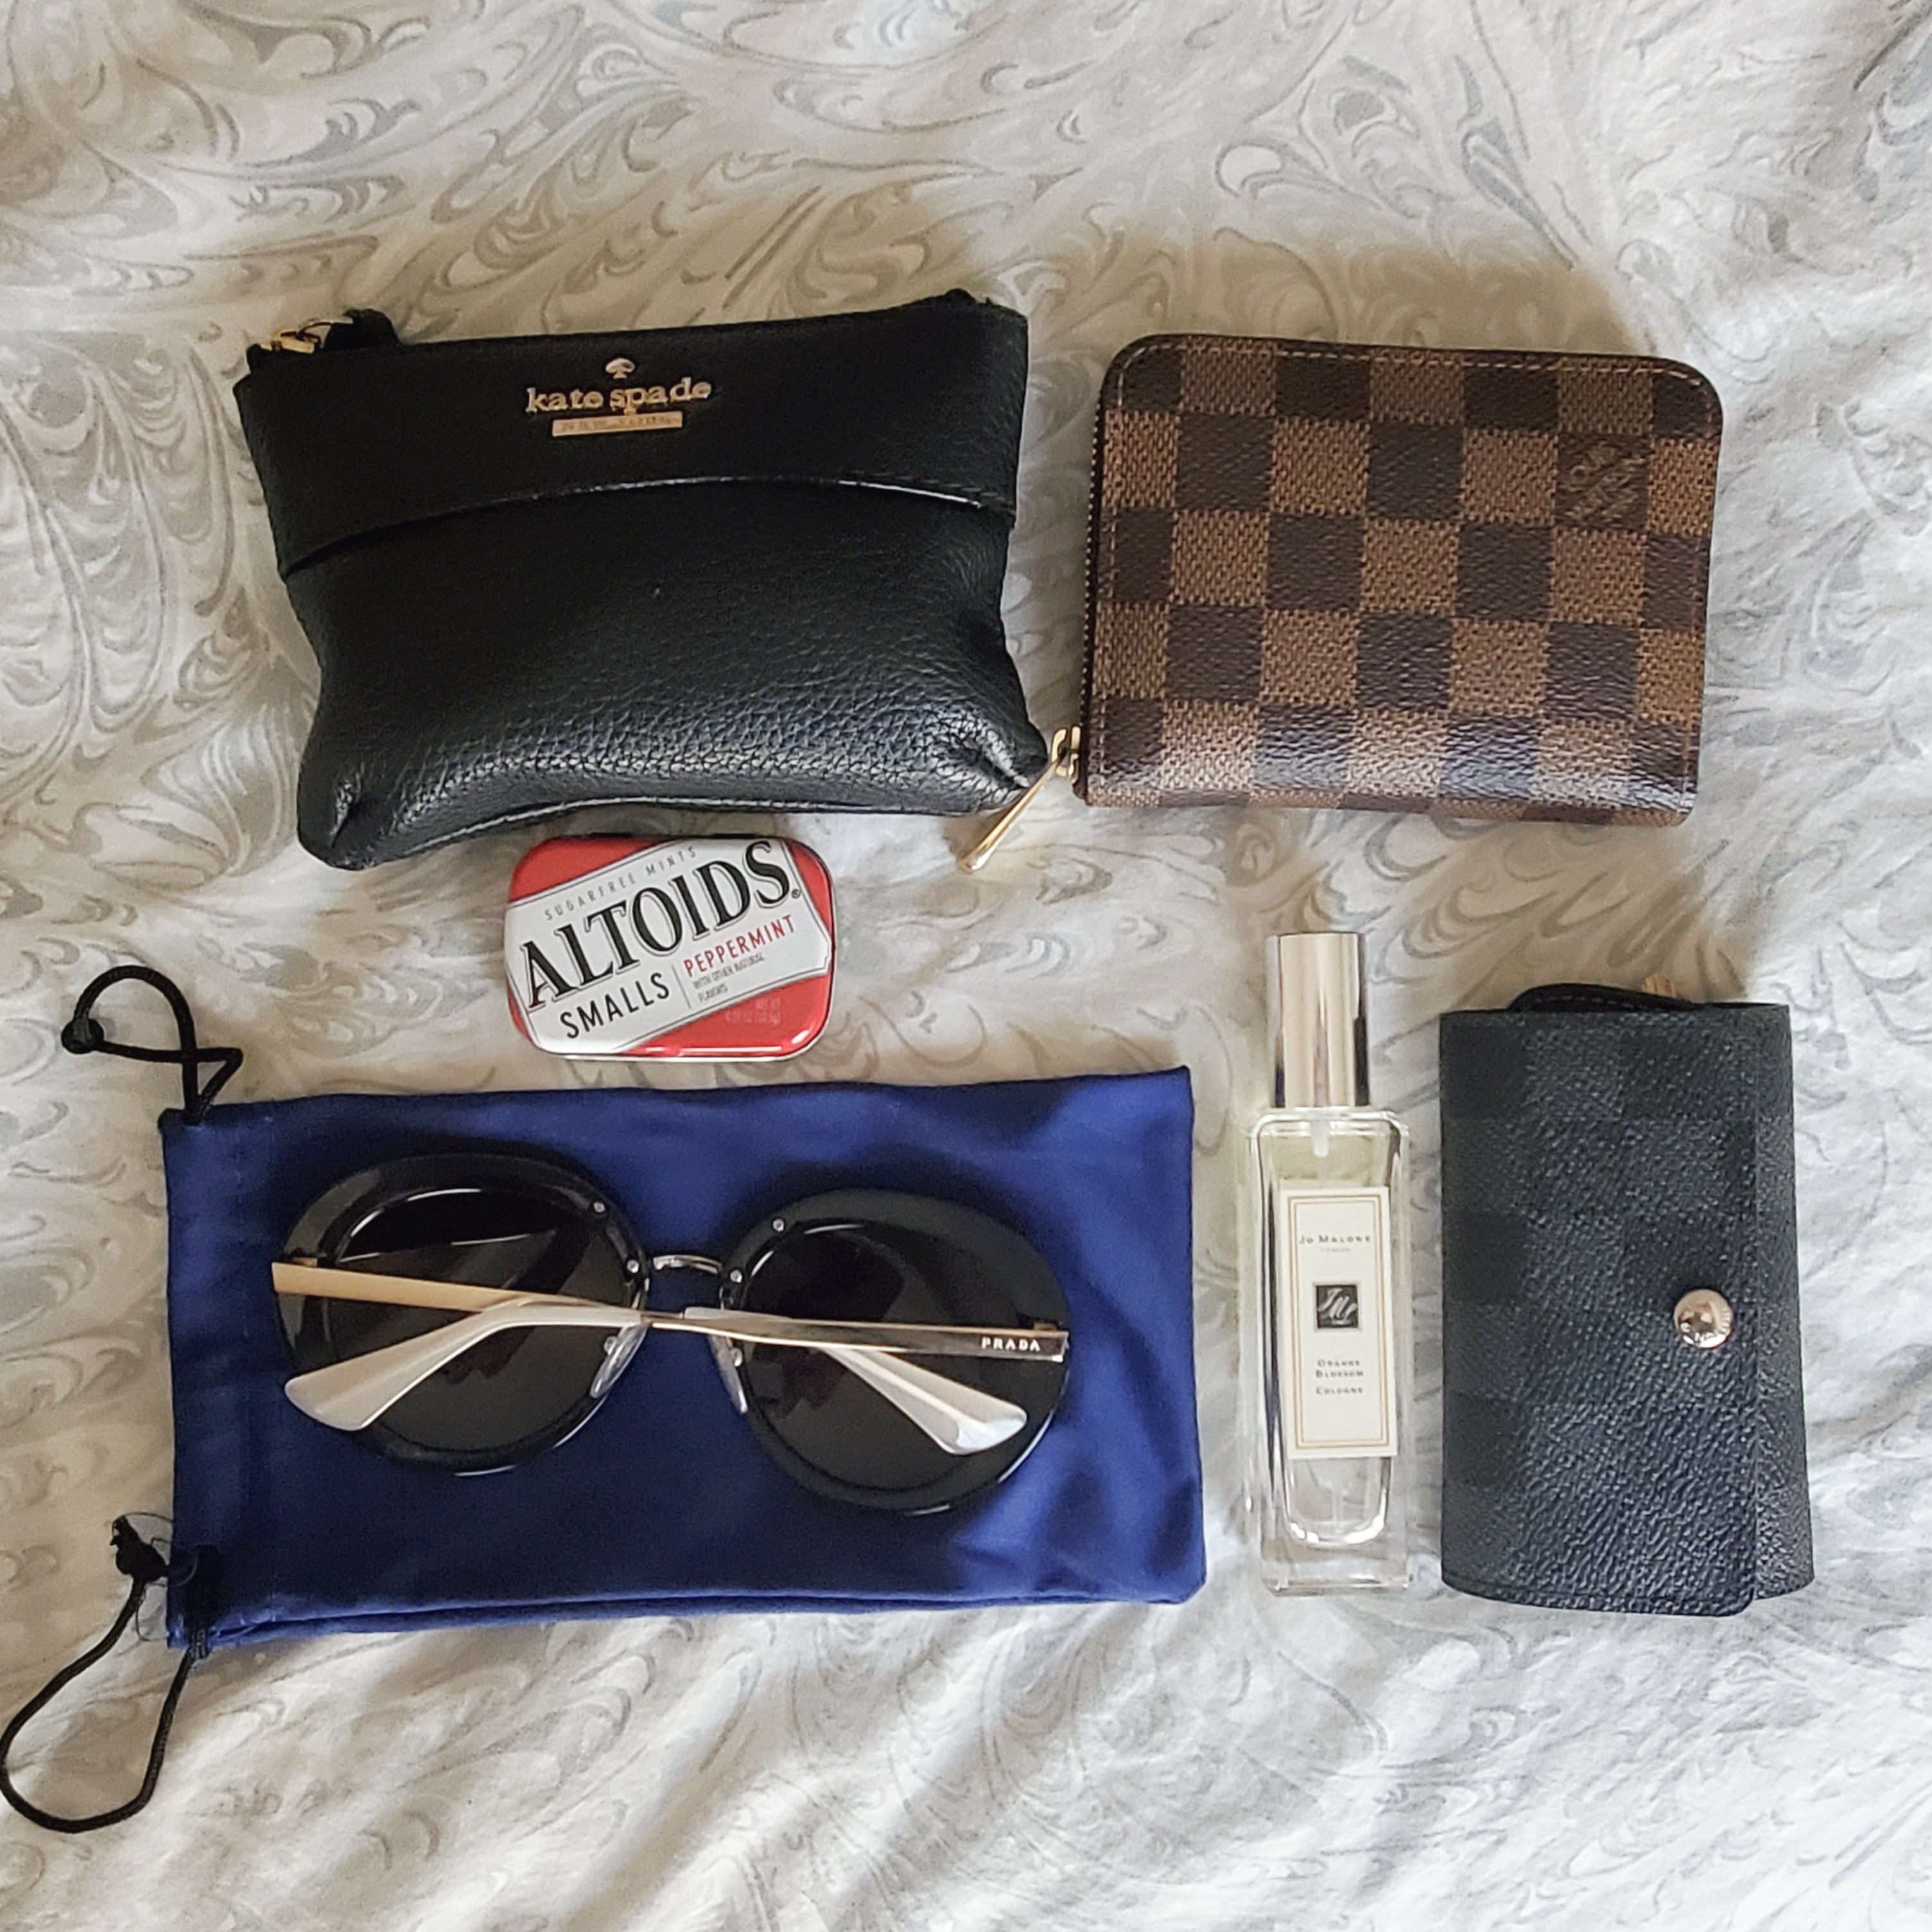 I have my eye on the Louis Vuitton Alma BB in epi leather. For those who  have the bag, would you recommend it? What are some pros and cons. Thank  you! 